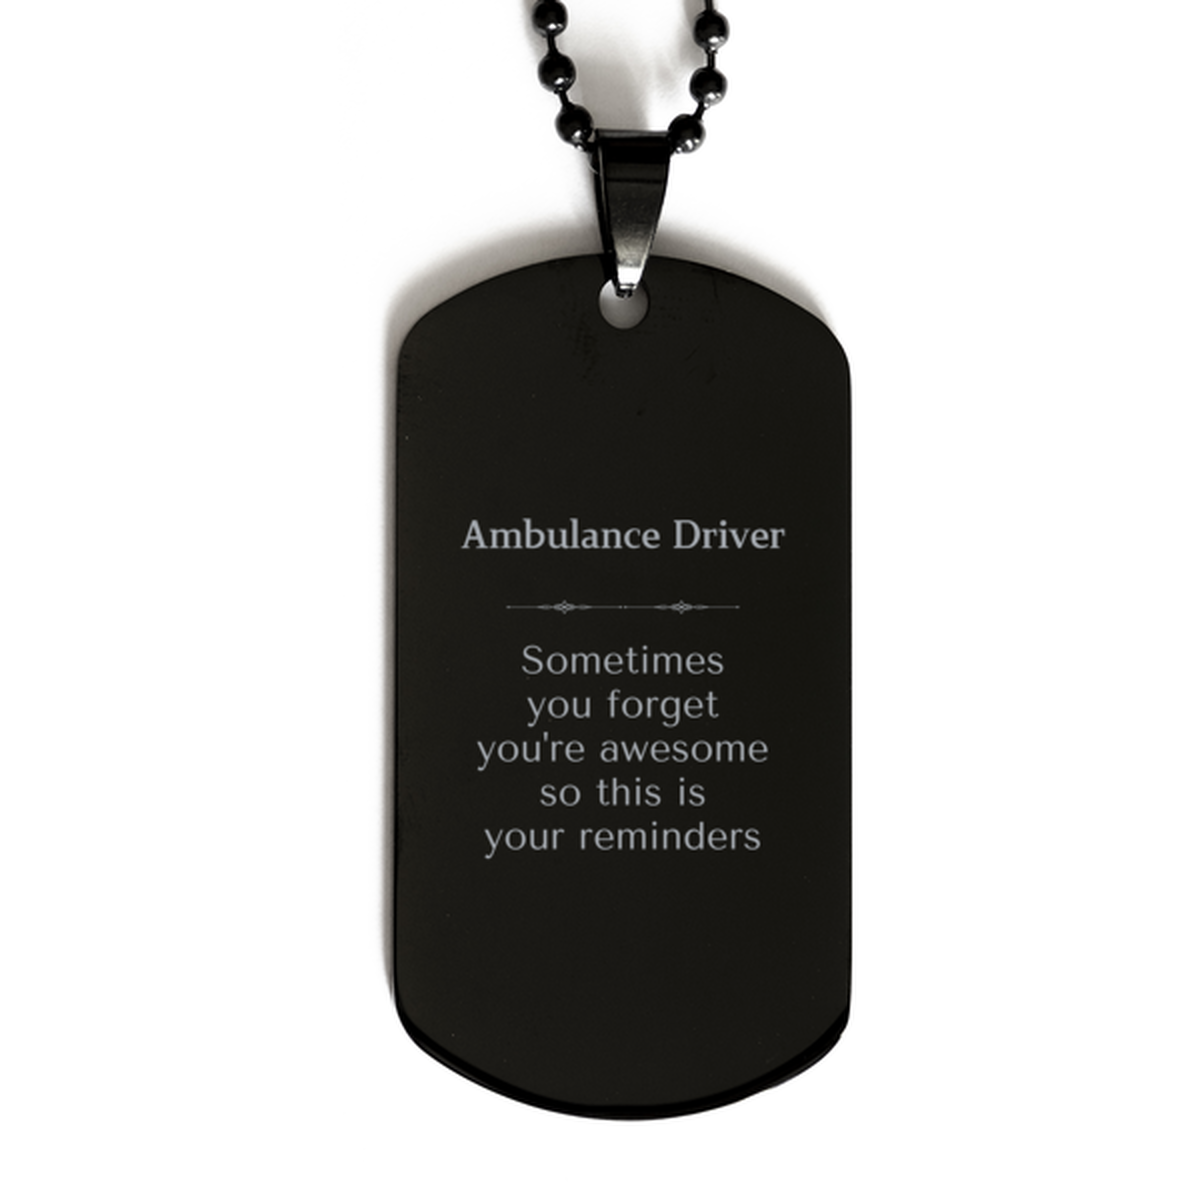 Sentimental Ambulance Driver Black Dog Tag, Ambulance Driver Sometimes you forget you're awesome so this is your reminders, Graduation Christmas Birthday Gifts for Ambulance Driver, Men, Women, Coworkers